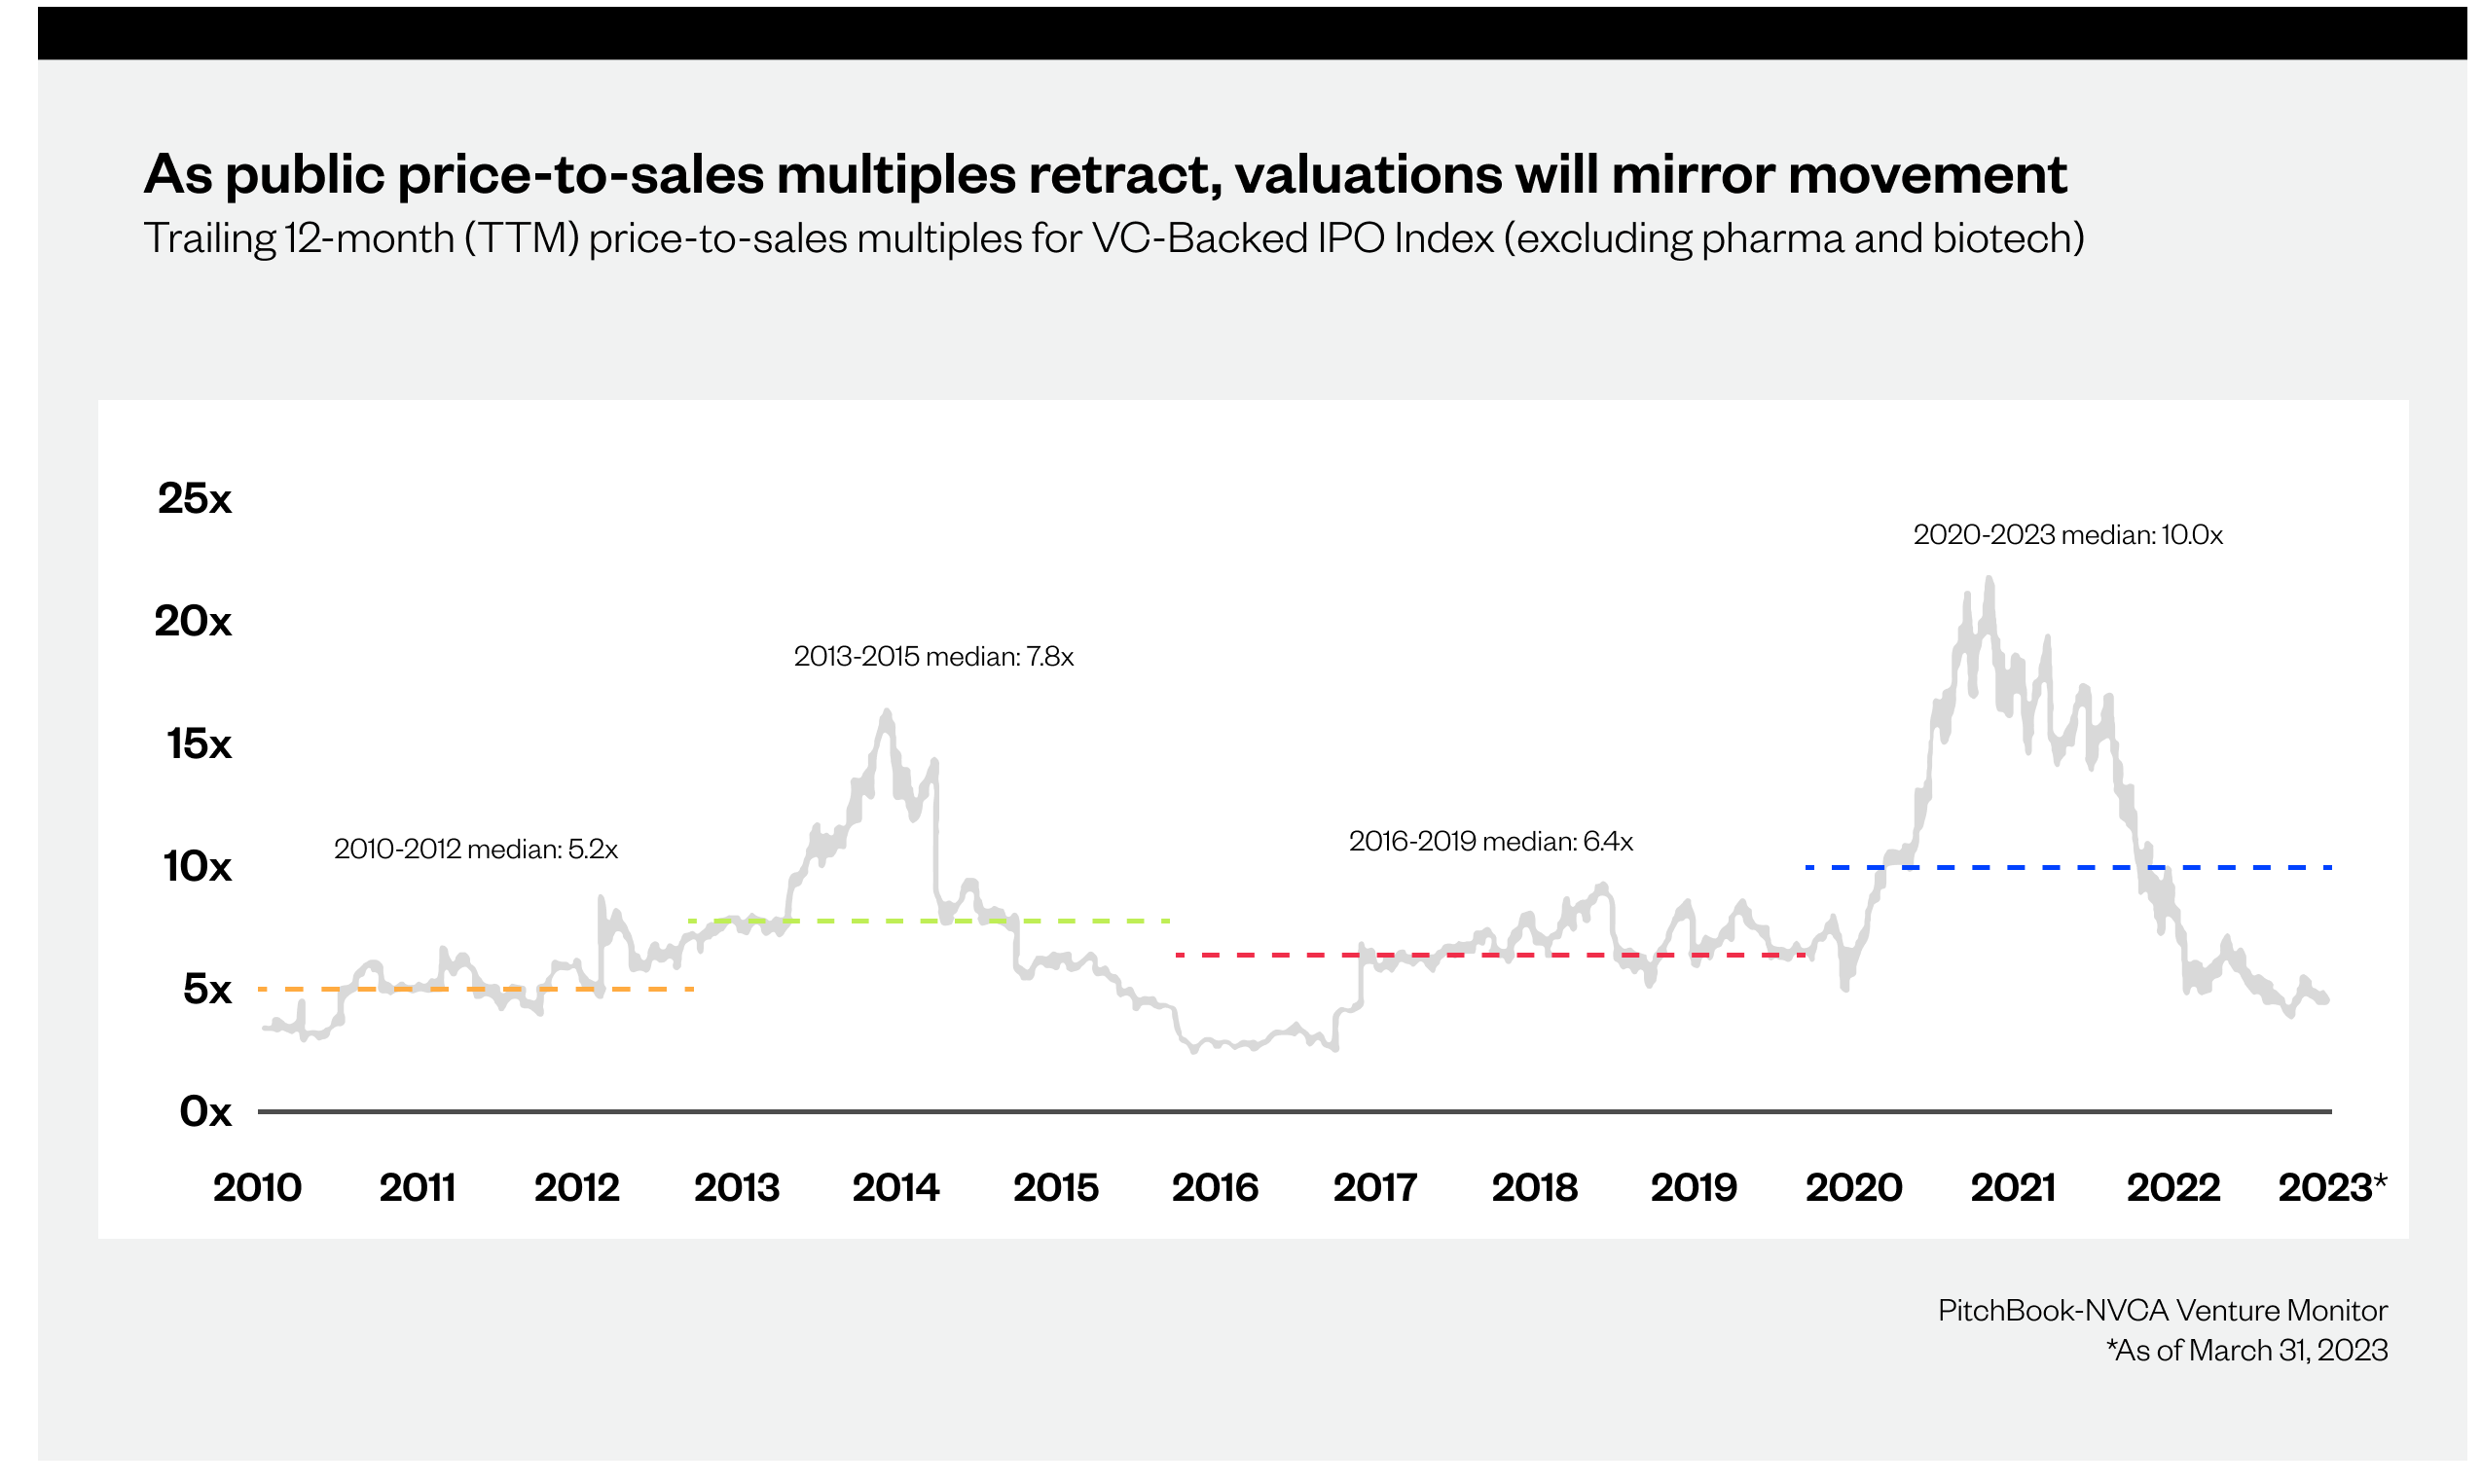 The average valuation in 2023 is standing around 5.0x, a 75% decline from the average valuations seen in 2021